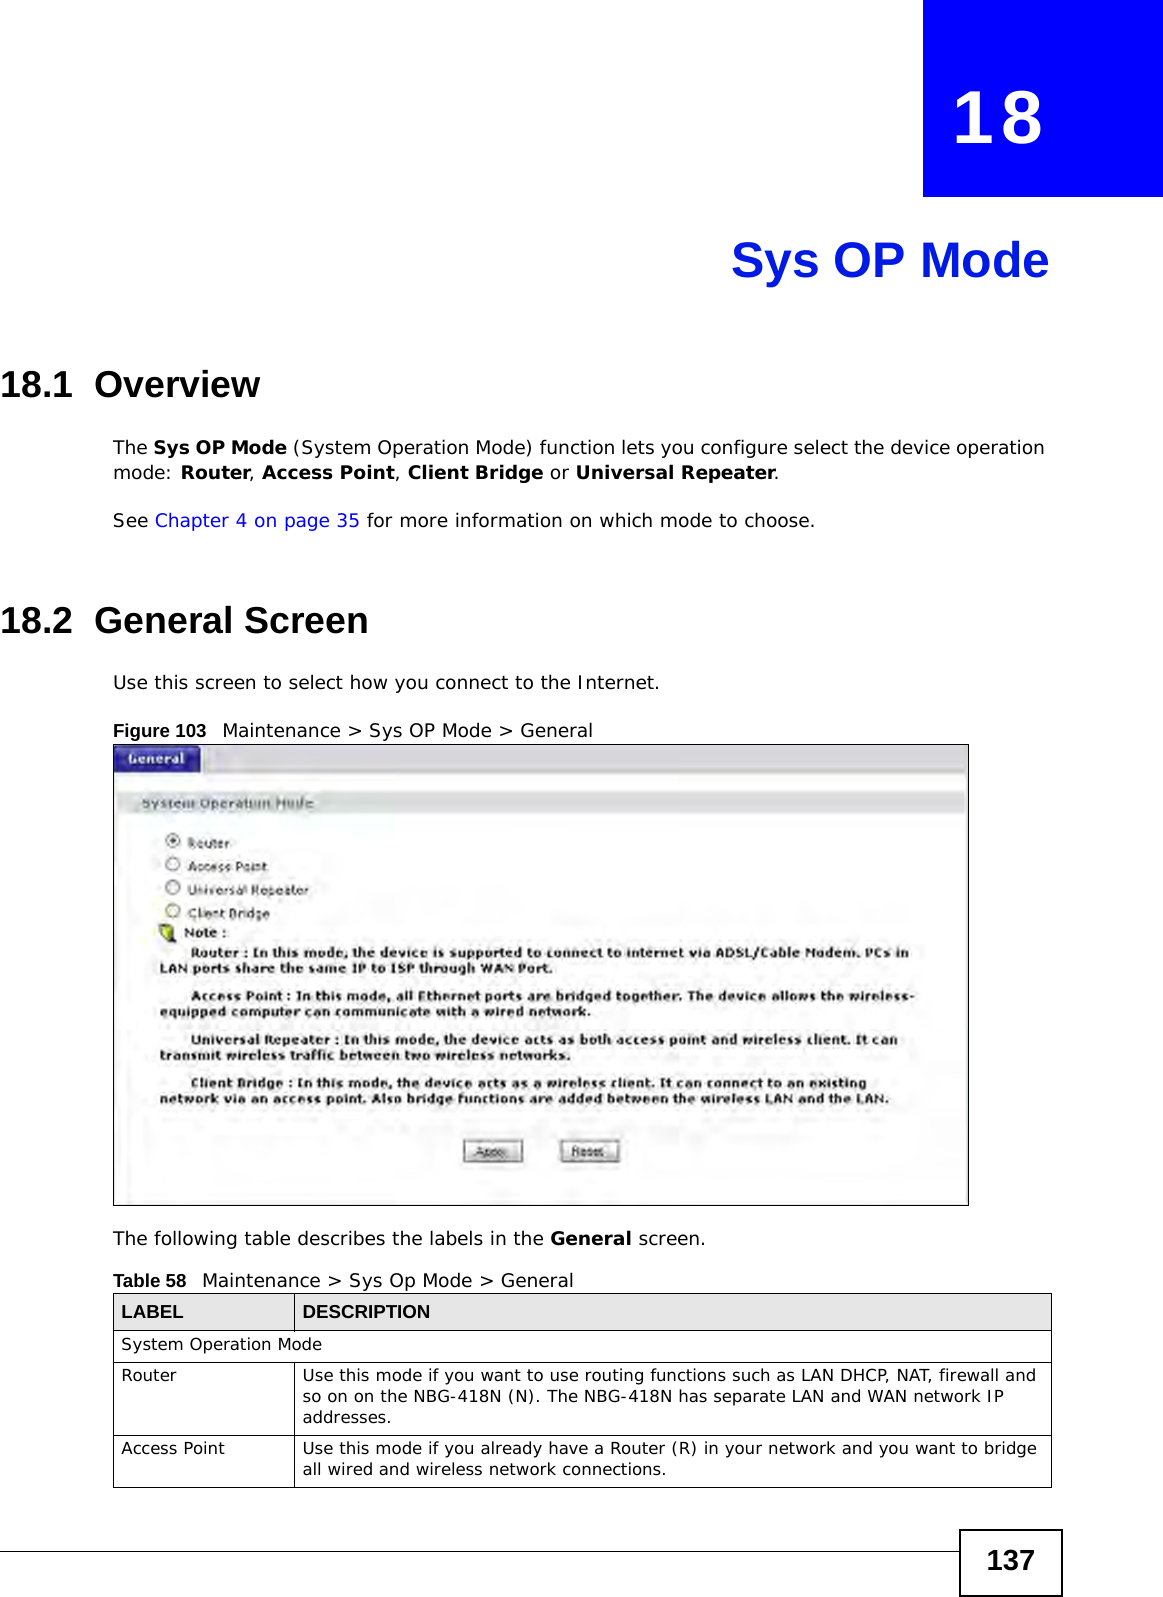 137CHAPTER   18Sys OP Mode18.1  OverviewThe Sys OP Mode (System Operation Mode) function lets you configure select the device operation mode: Router, Access Point, Client Bridge or Universal Repeater. See Chapter 4 on page 35 for more information on which mode to choose.18.2  General ScreenUse this screen to select how you connect to the Internet. Figure 103   Maintenance &gt; Sys OP Mode &gt; General The following table describes the labels in the General screen.Table 58   Maintenance &gt; Sys Op Mode &gt; GeneralLABEL DESCRIPTIONSystem Operation ModeRouter  Use this mode if you want to use routing functions such as LAN DHCP, NAT, firewall and so on on the NBG-418N (N). The NBG-418N has separate LAN and WAN network IP addresses.Access Point Use this mode if you already have a Router (R) in your network and you want to bridge all wired and wireless network connections.